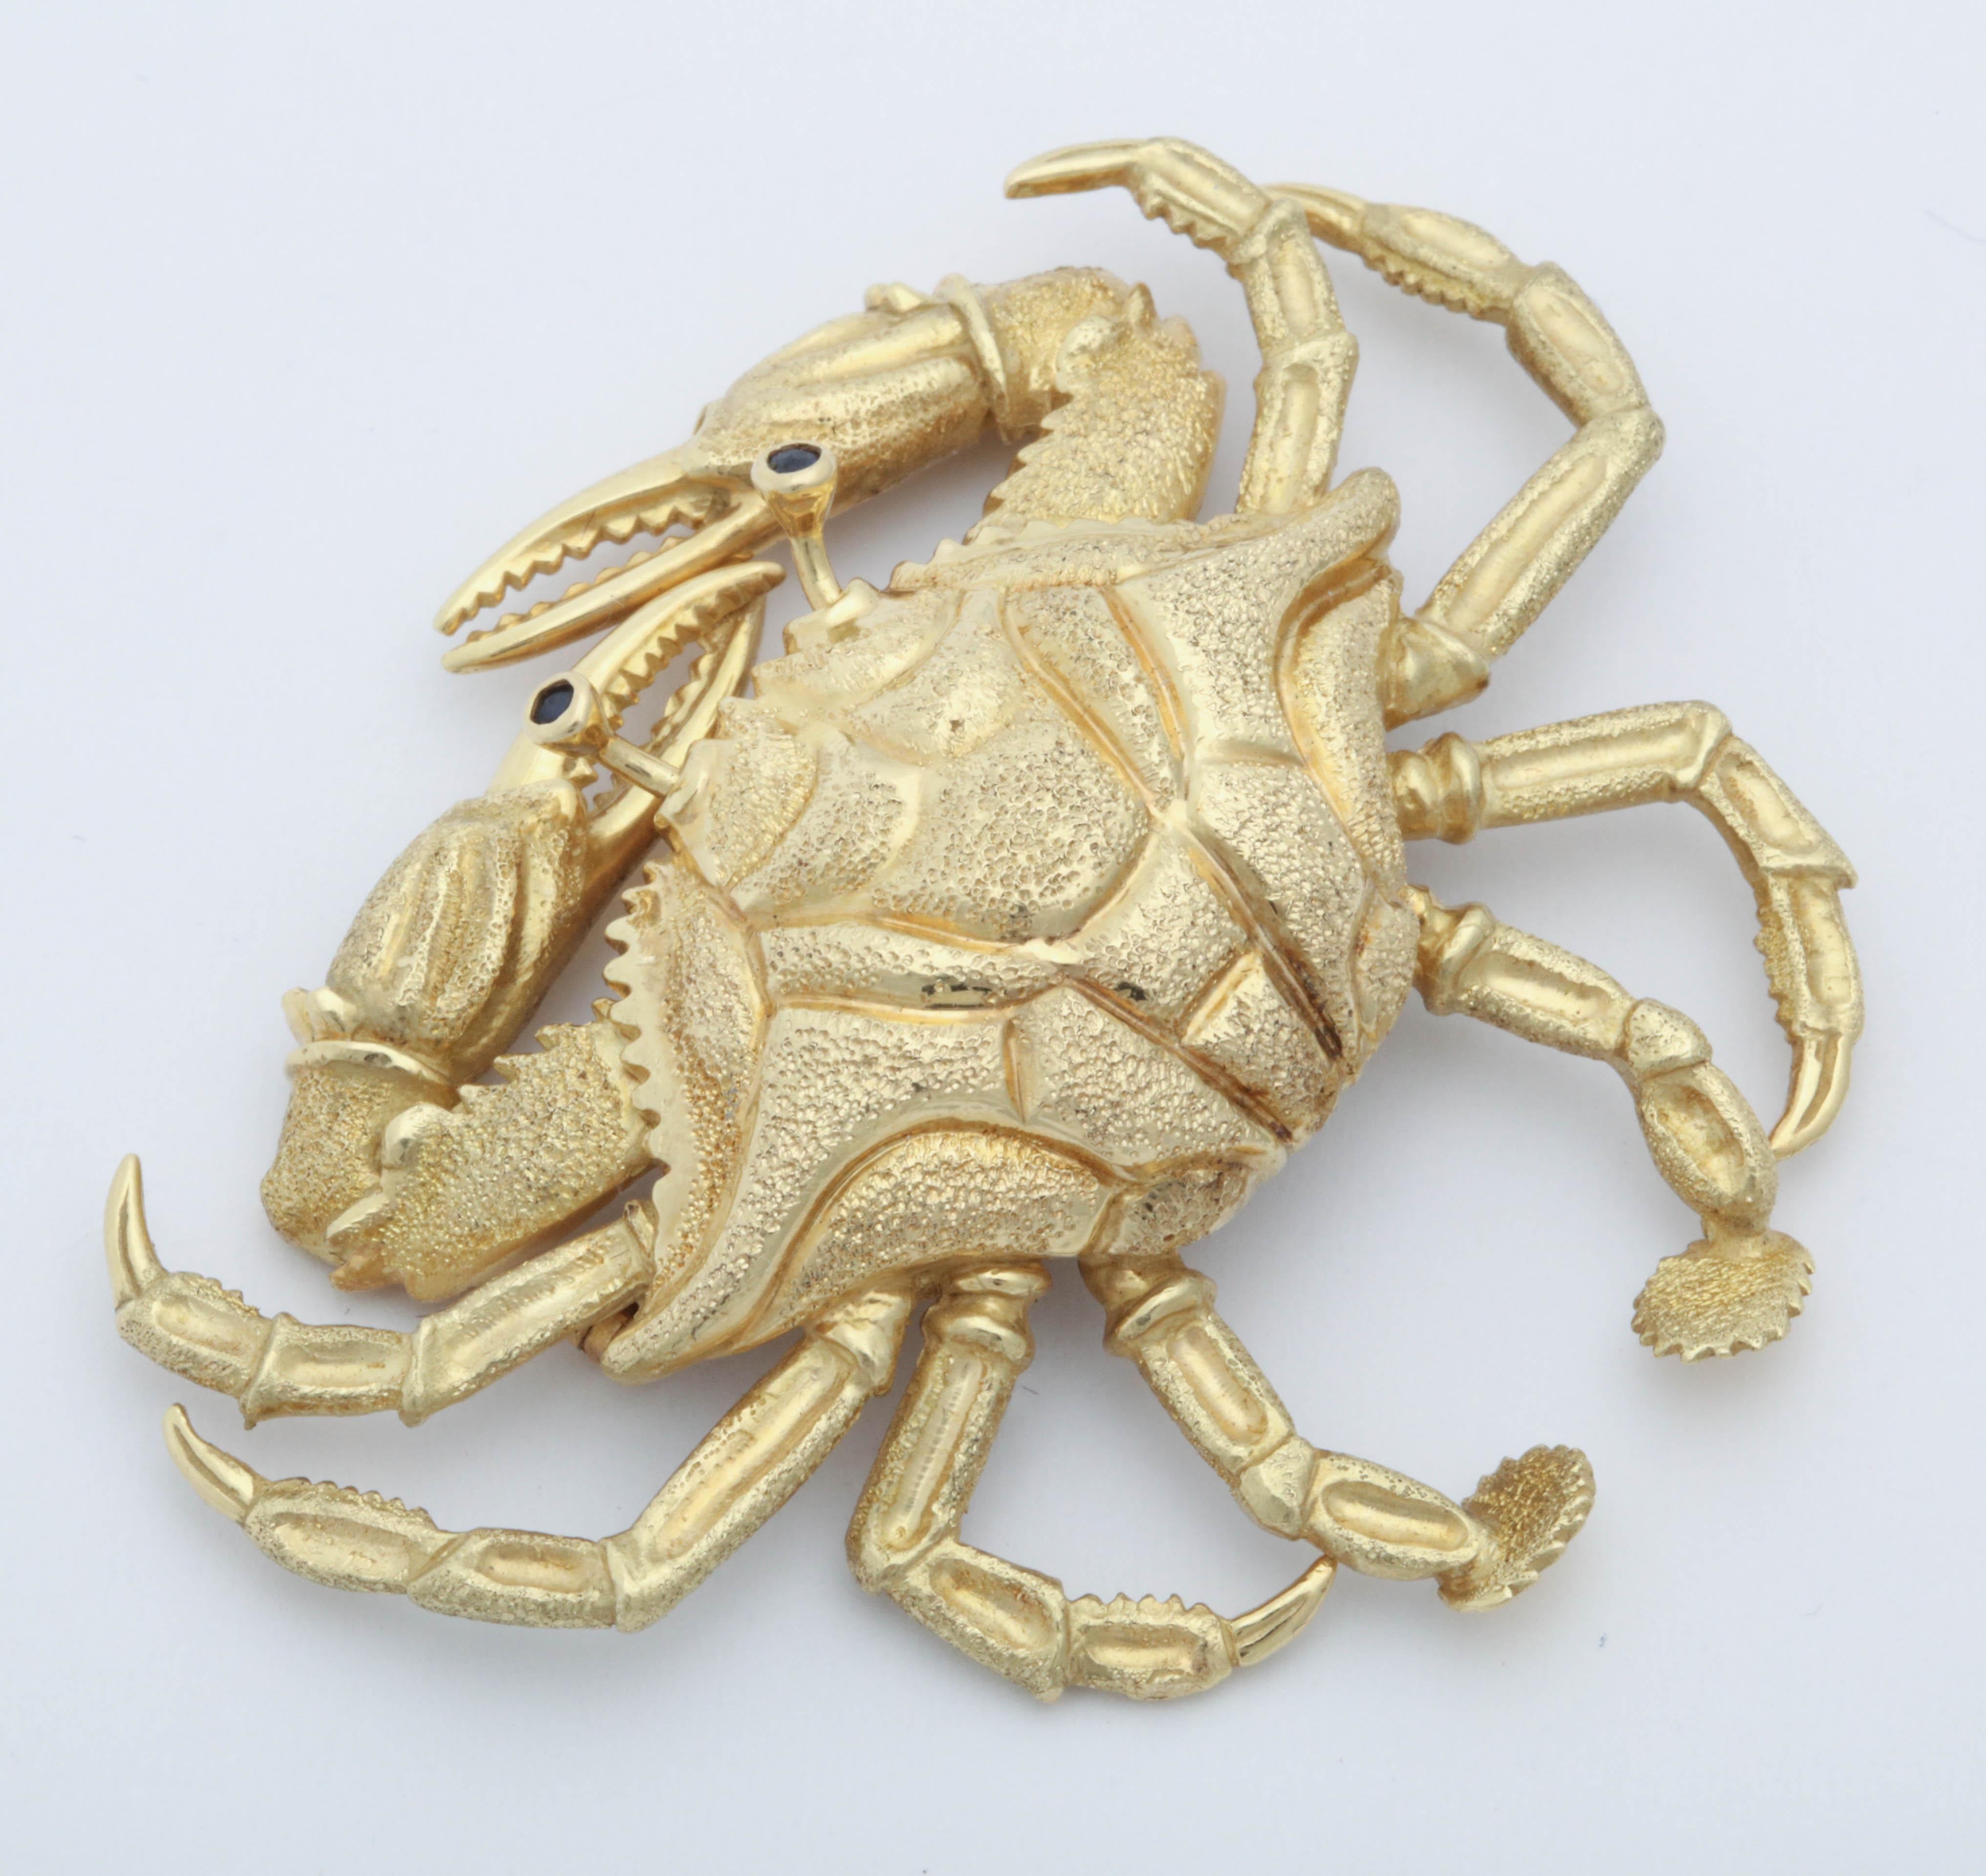 Round Cut 1960s Figural Crab Brooch with Textured Gold and Sapphire Eyes